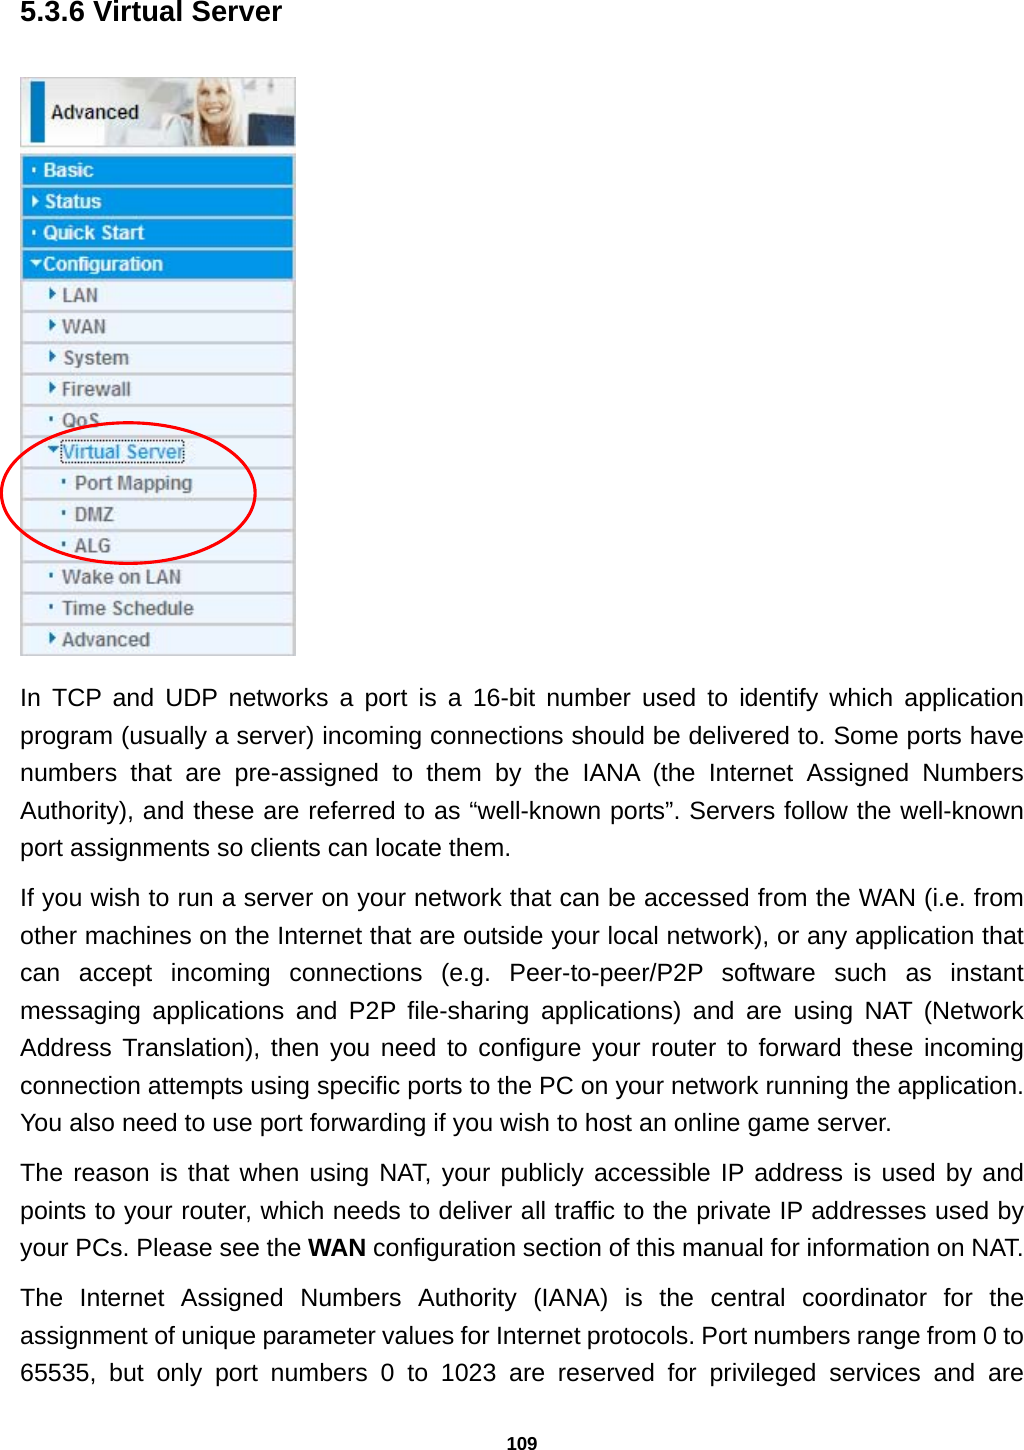 109 5.3.6 Virtual Server  In TCP and UDP networks a port is a 16-bit number used to identify which application program (usually a server) incoming connections should be delivered to. Some ports have numbers that are pre-assigned to them by the IANA (the Internet Assigned Numbers Authority), and these are referred to as “well-known ports”. Servers follow the well-known port assignments so clients can locate them. If you wish to run a server on your network that can be accessed from the WAN (i.e. from other machines on the Internet that are outside your local network), or any application that can accept incoming connections (e.g. Peer-to-peer/P2P software such as instant messaging applications and P2P file-sharing applications) and are using NAT (Network Address Translation), then you need to configure your router to forward these incoming connection attempts using specific ports to the PC on your network running the application. You also need to use port forwarding if you wish to host an online game server. The reason is that when using NAT, your publicly accessible IP address is used by and points to your router, which needs to deliver all traffic to the private IP addresses used by your PCs. Please see the WAN configuration section of this manual for information on NAT. The Internet Assigned Numbers Authority (IANA) is the central coordinator for the assignment of unique parameter values for Internet protocols. Port numbers range from 0 to 65535, but only port numbers 0 to 1023 are reserved for privileged services and are 